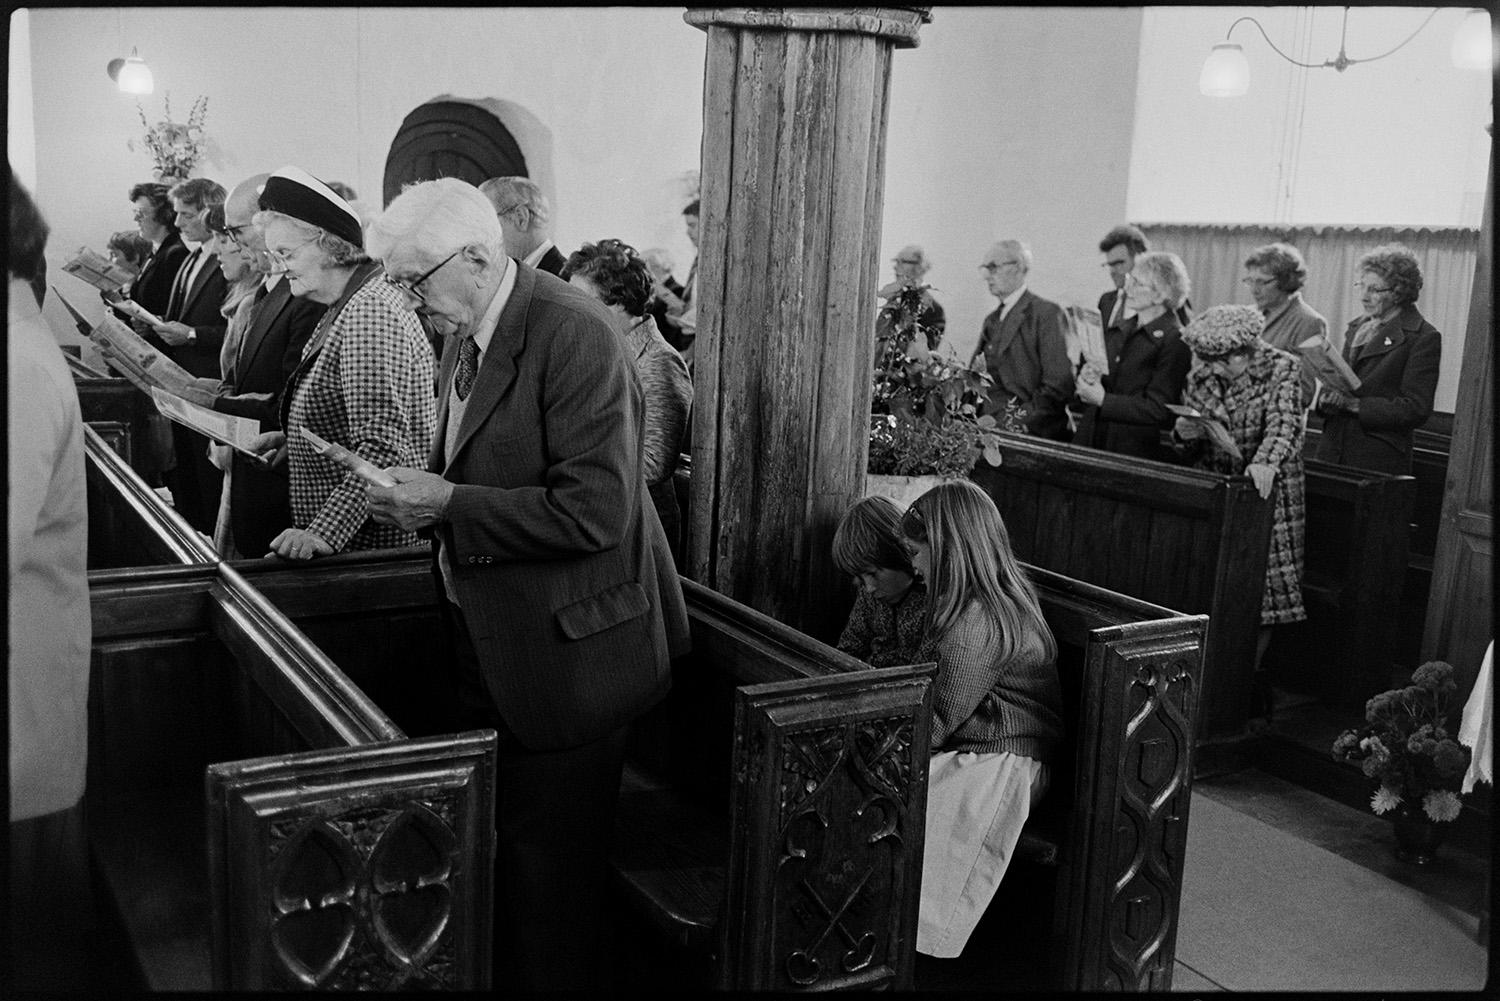 People in church, vicar preaching sermon, pulpit.
[Men, women and children dressed in suits and smart clothes standing in wooden pews in the Church of St. Peter, Dowland, singing hymns at the Harvest Festival. Some of the detailed wood carving on the end of the pews can be seen.]